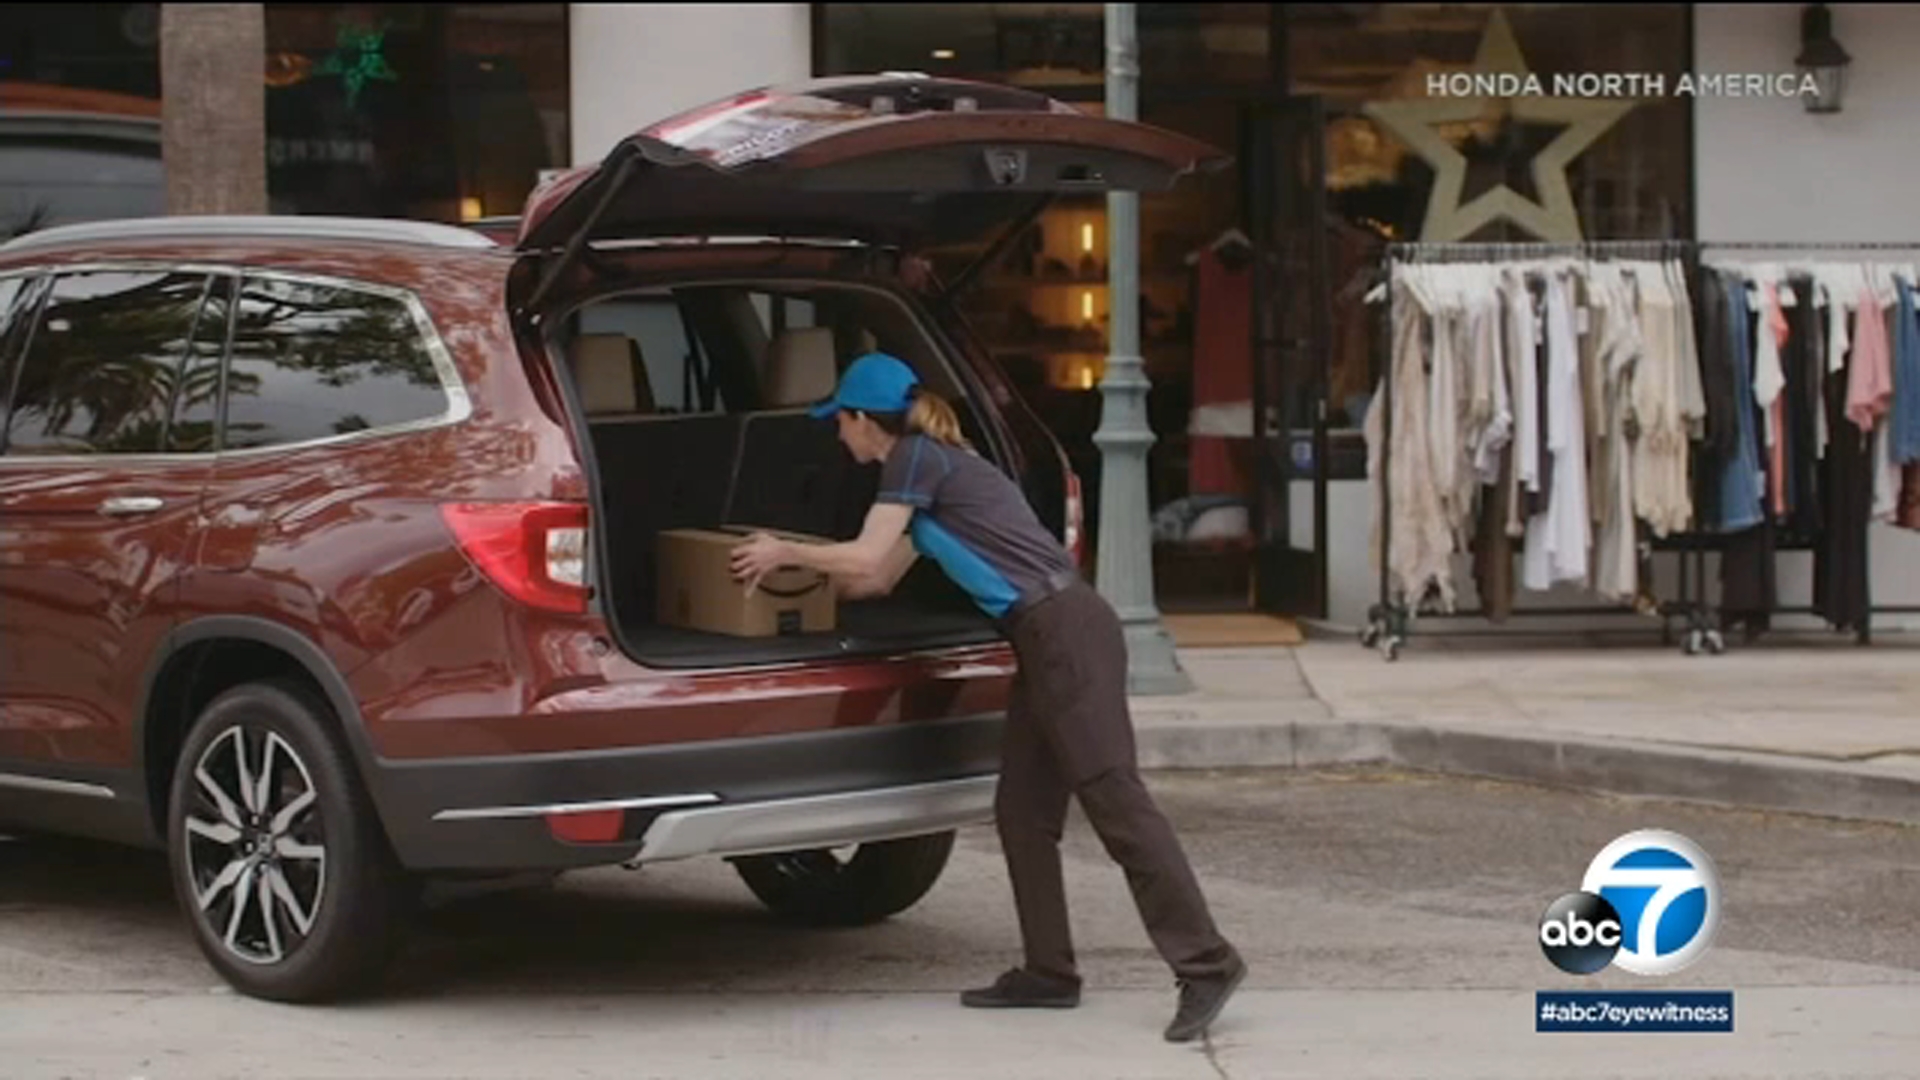 Technology In New Honda Models Lets Amazon Deliver Packages Right